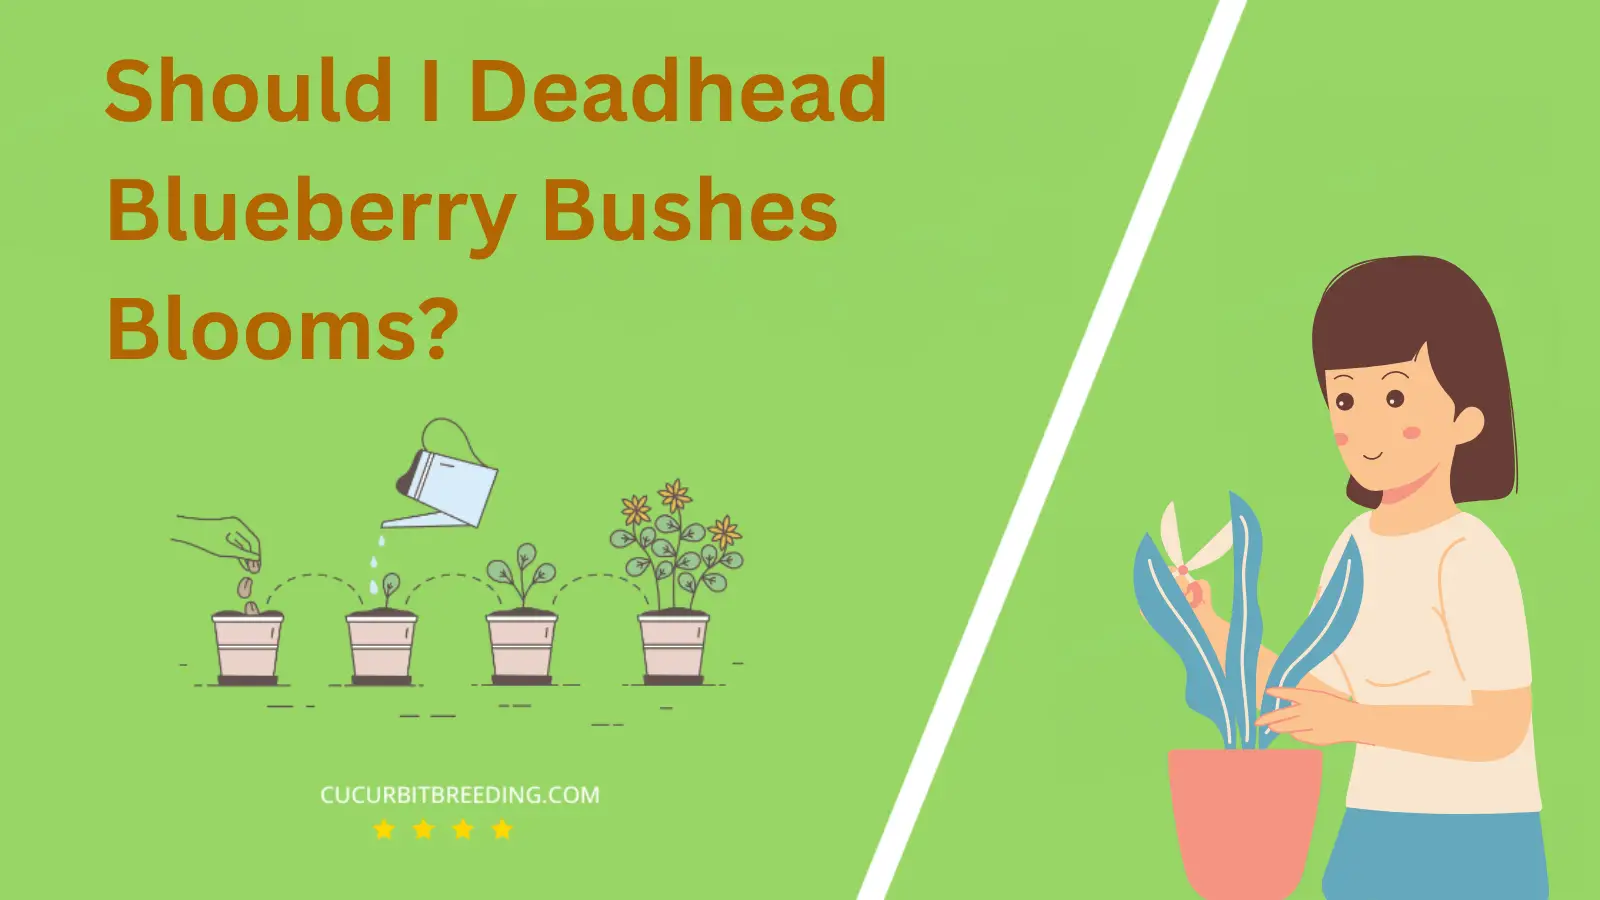 Should I Deadhead Blueberry Bushes Blooms?